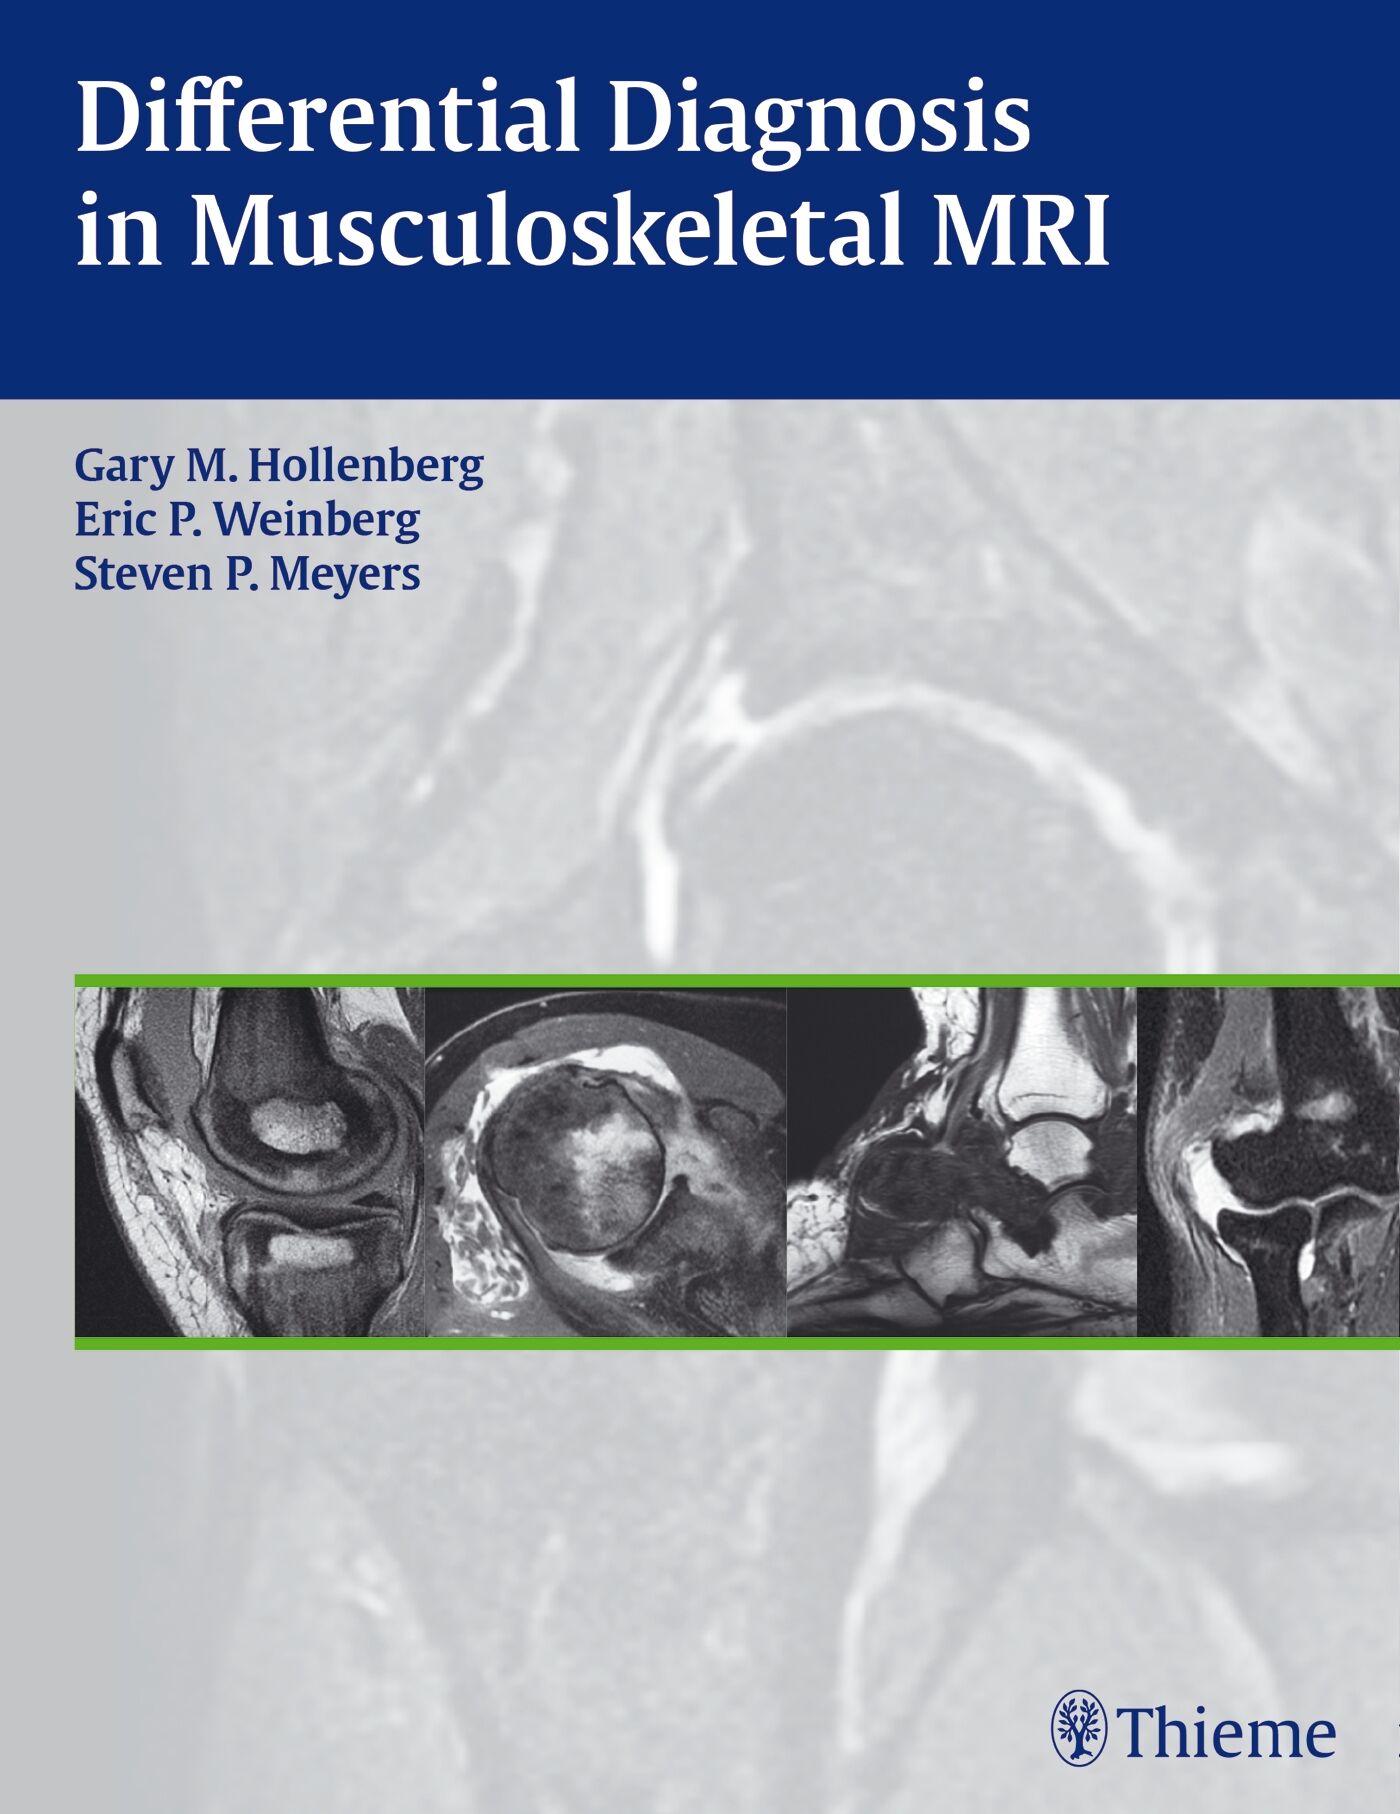 Differential Diagnosis in Musculoskeletal MR, 9781604066838